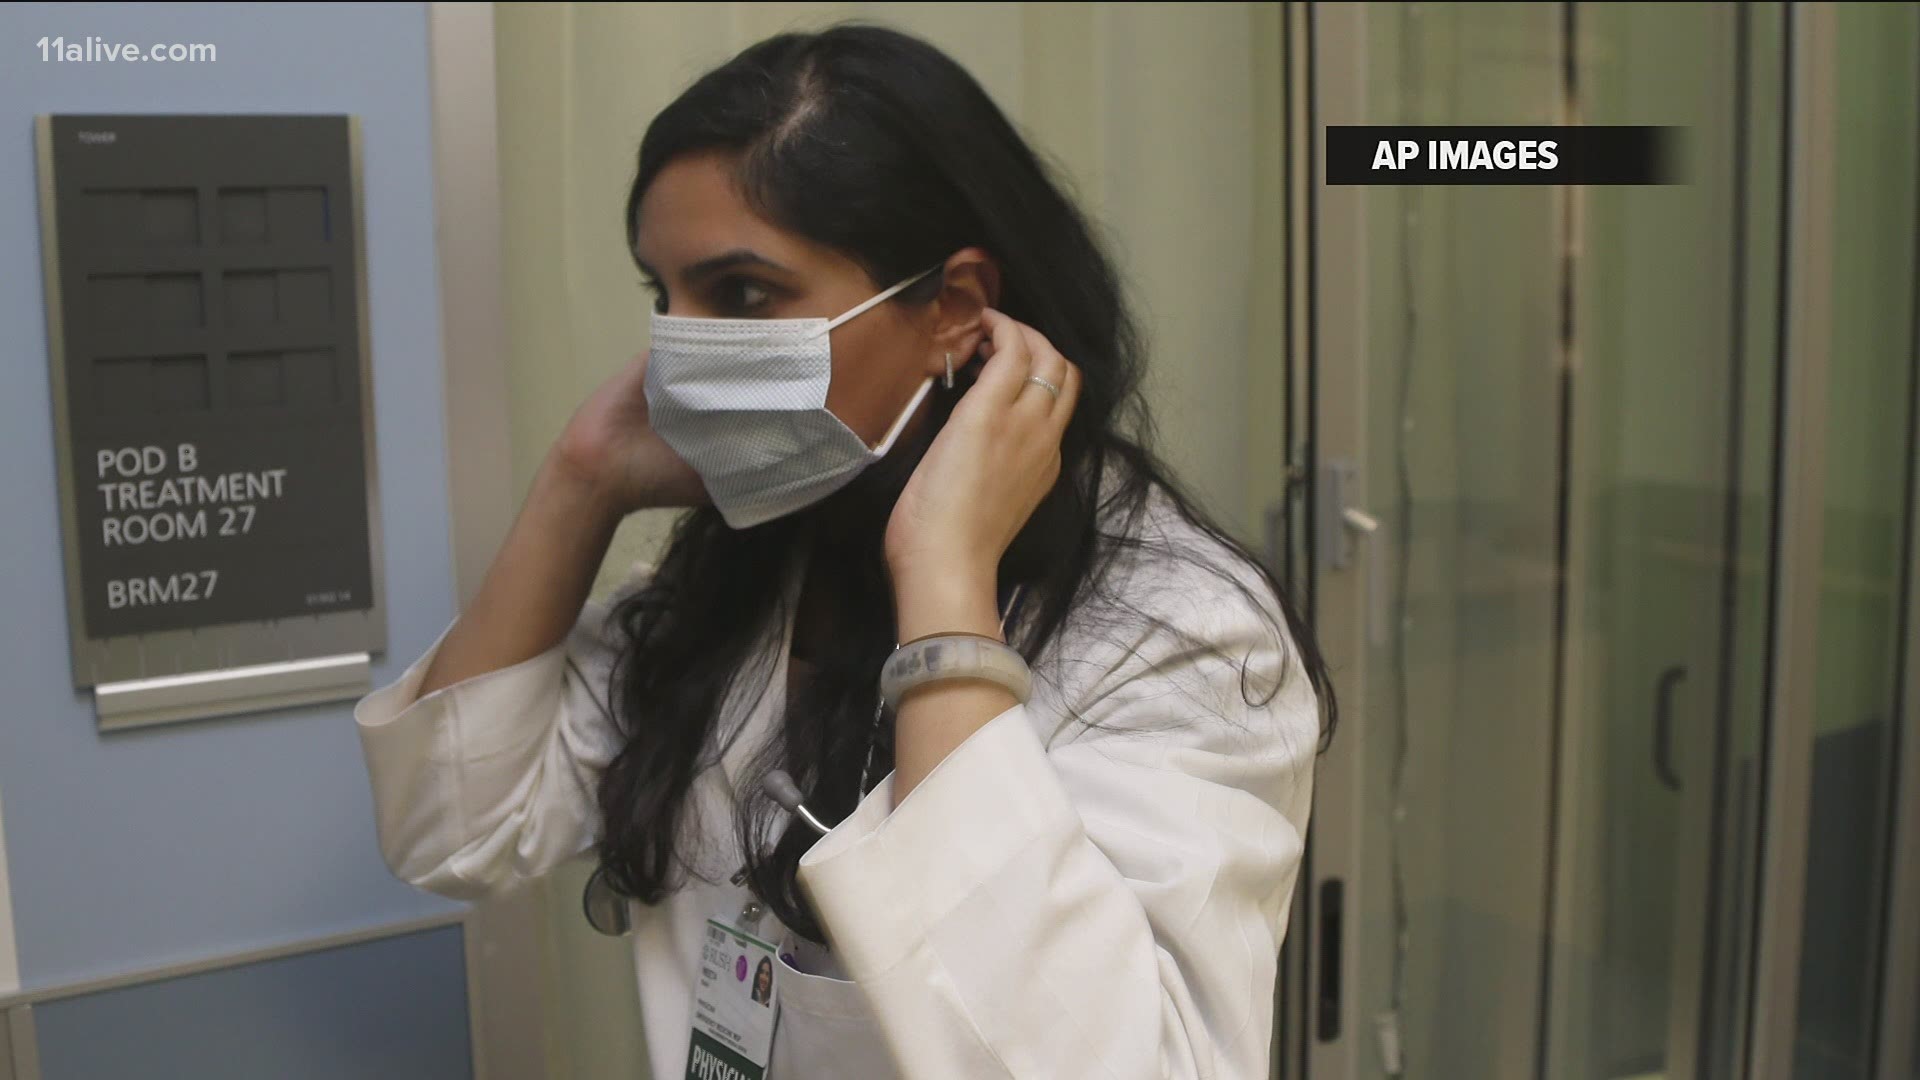 It's been a milder than usual flu season and some believe masks are playing a role.